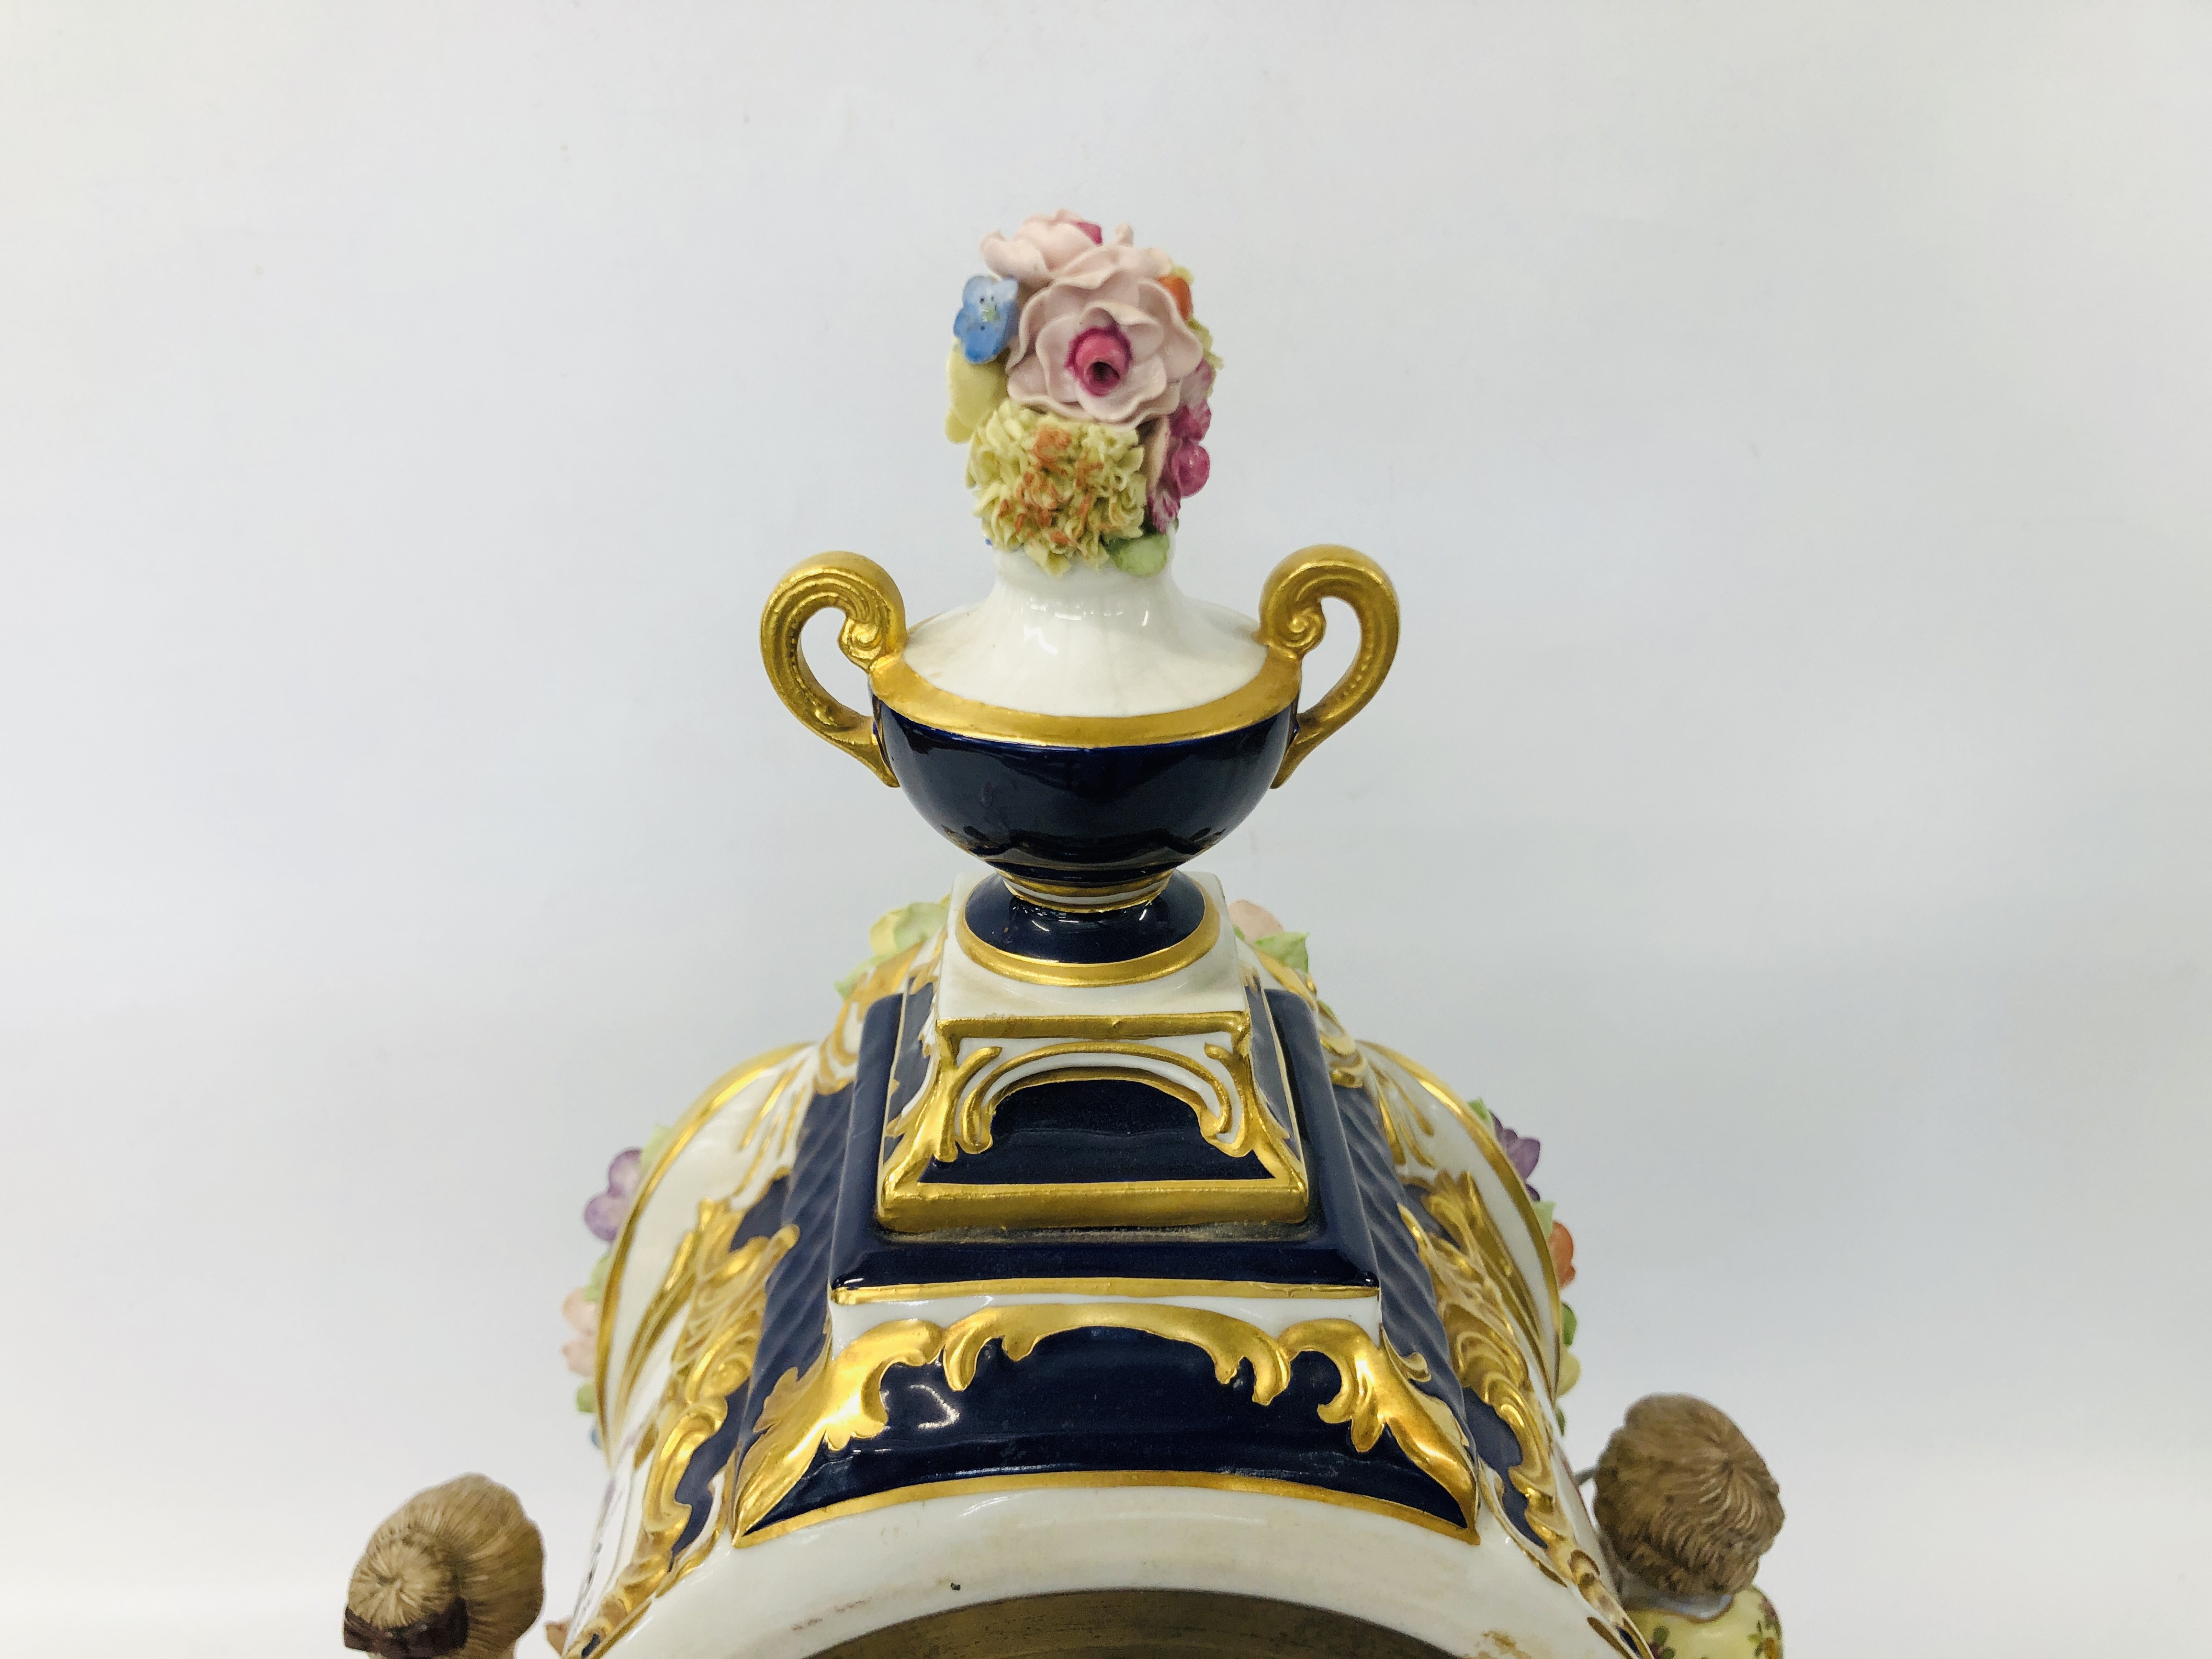 HIGHLY DECORATIVE MODERN PORCELAIN DRESDEN CLOCK ADORNED WITH BRIGHTLY COLOURED FLOWERS AND GILT - Image 9 of 12